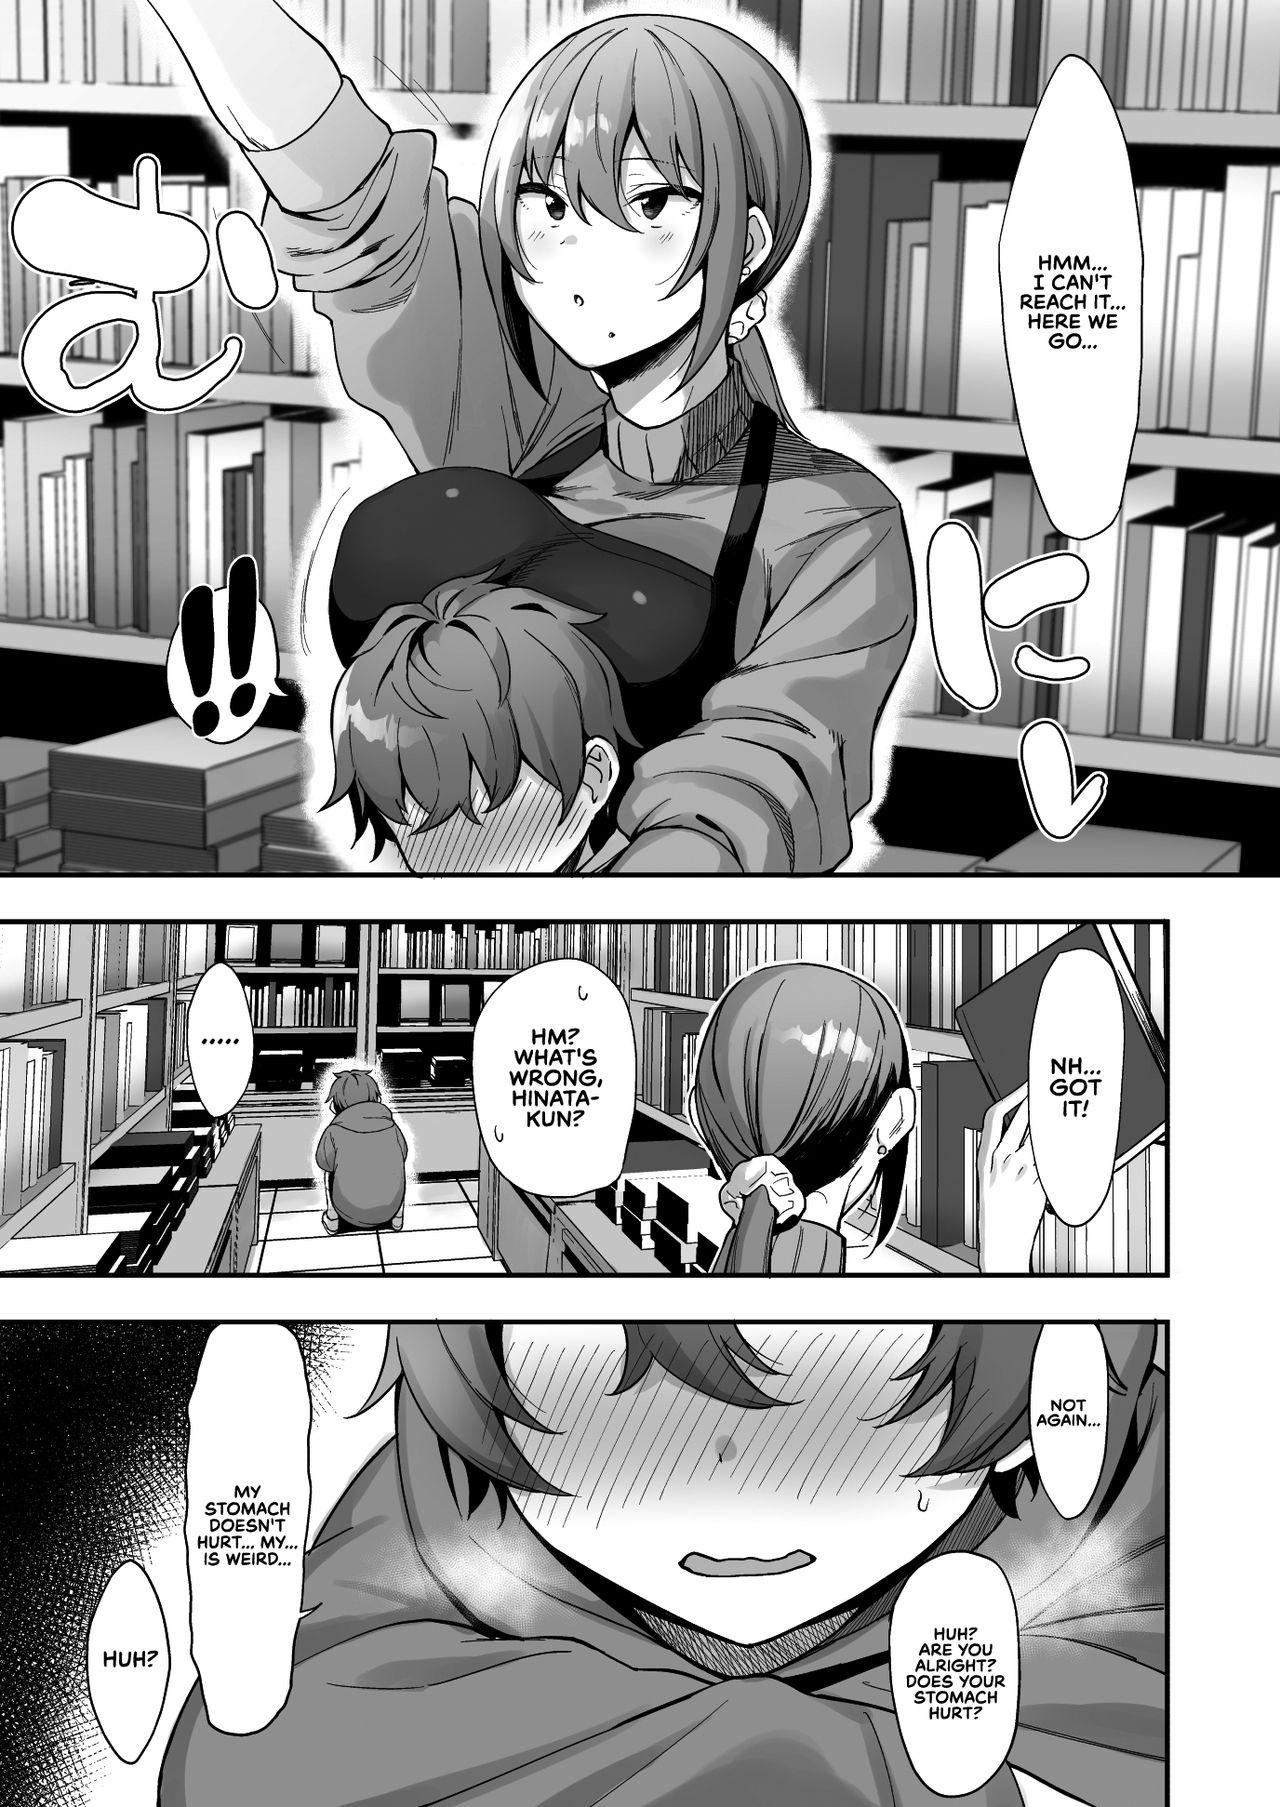 Follando Furuhonya no Onee-san to | With The Lady From The Used Book Shop - Original Cei - Page 8